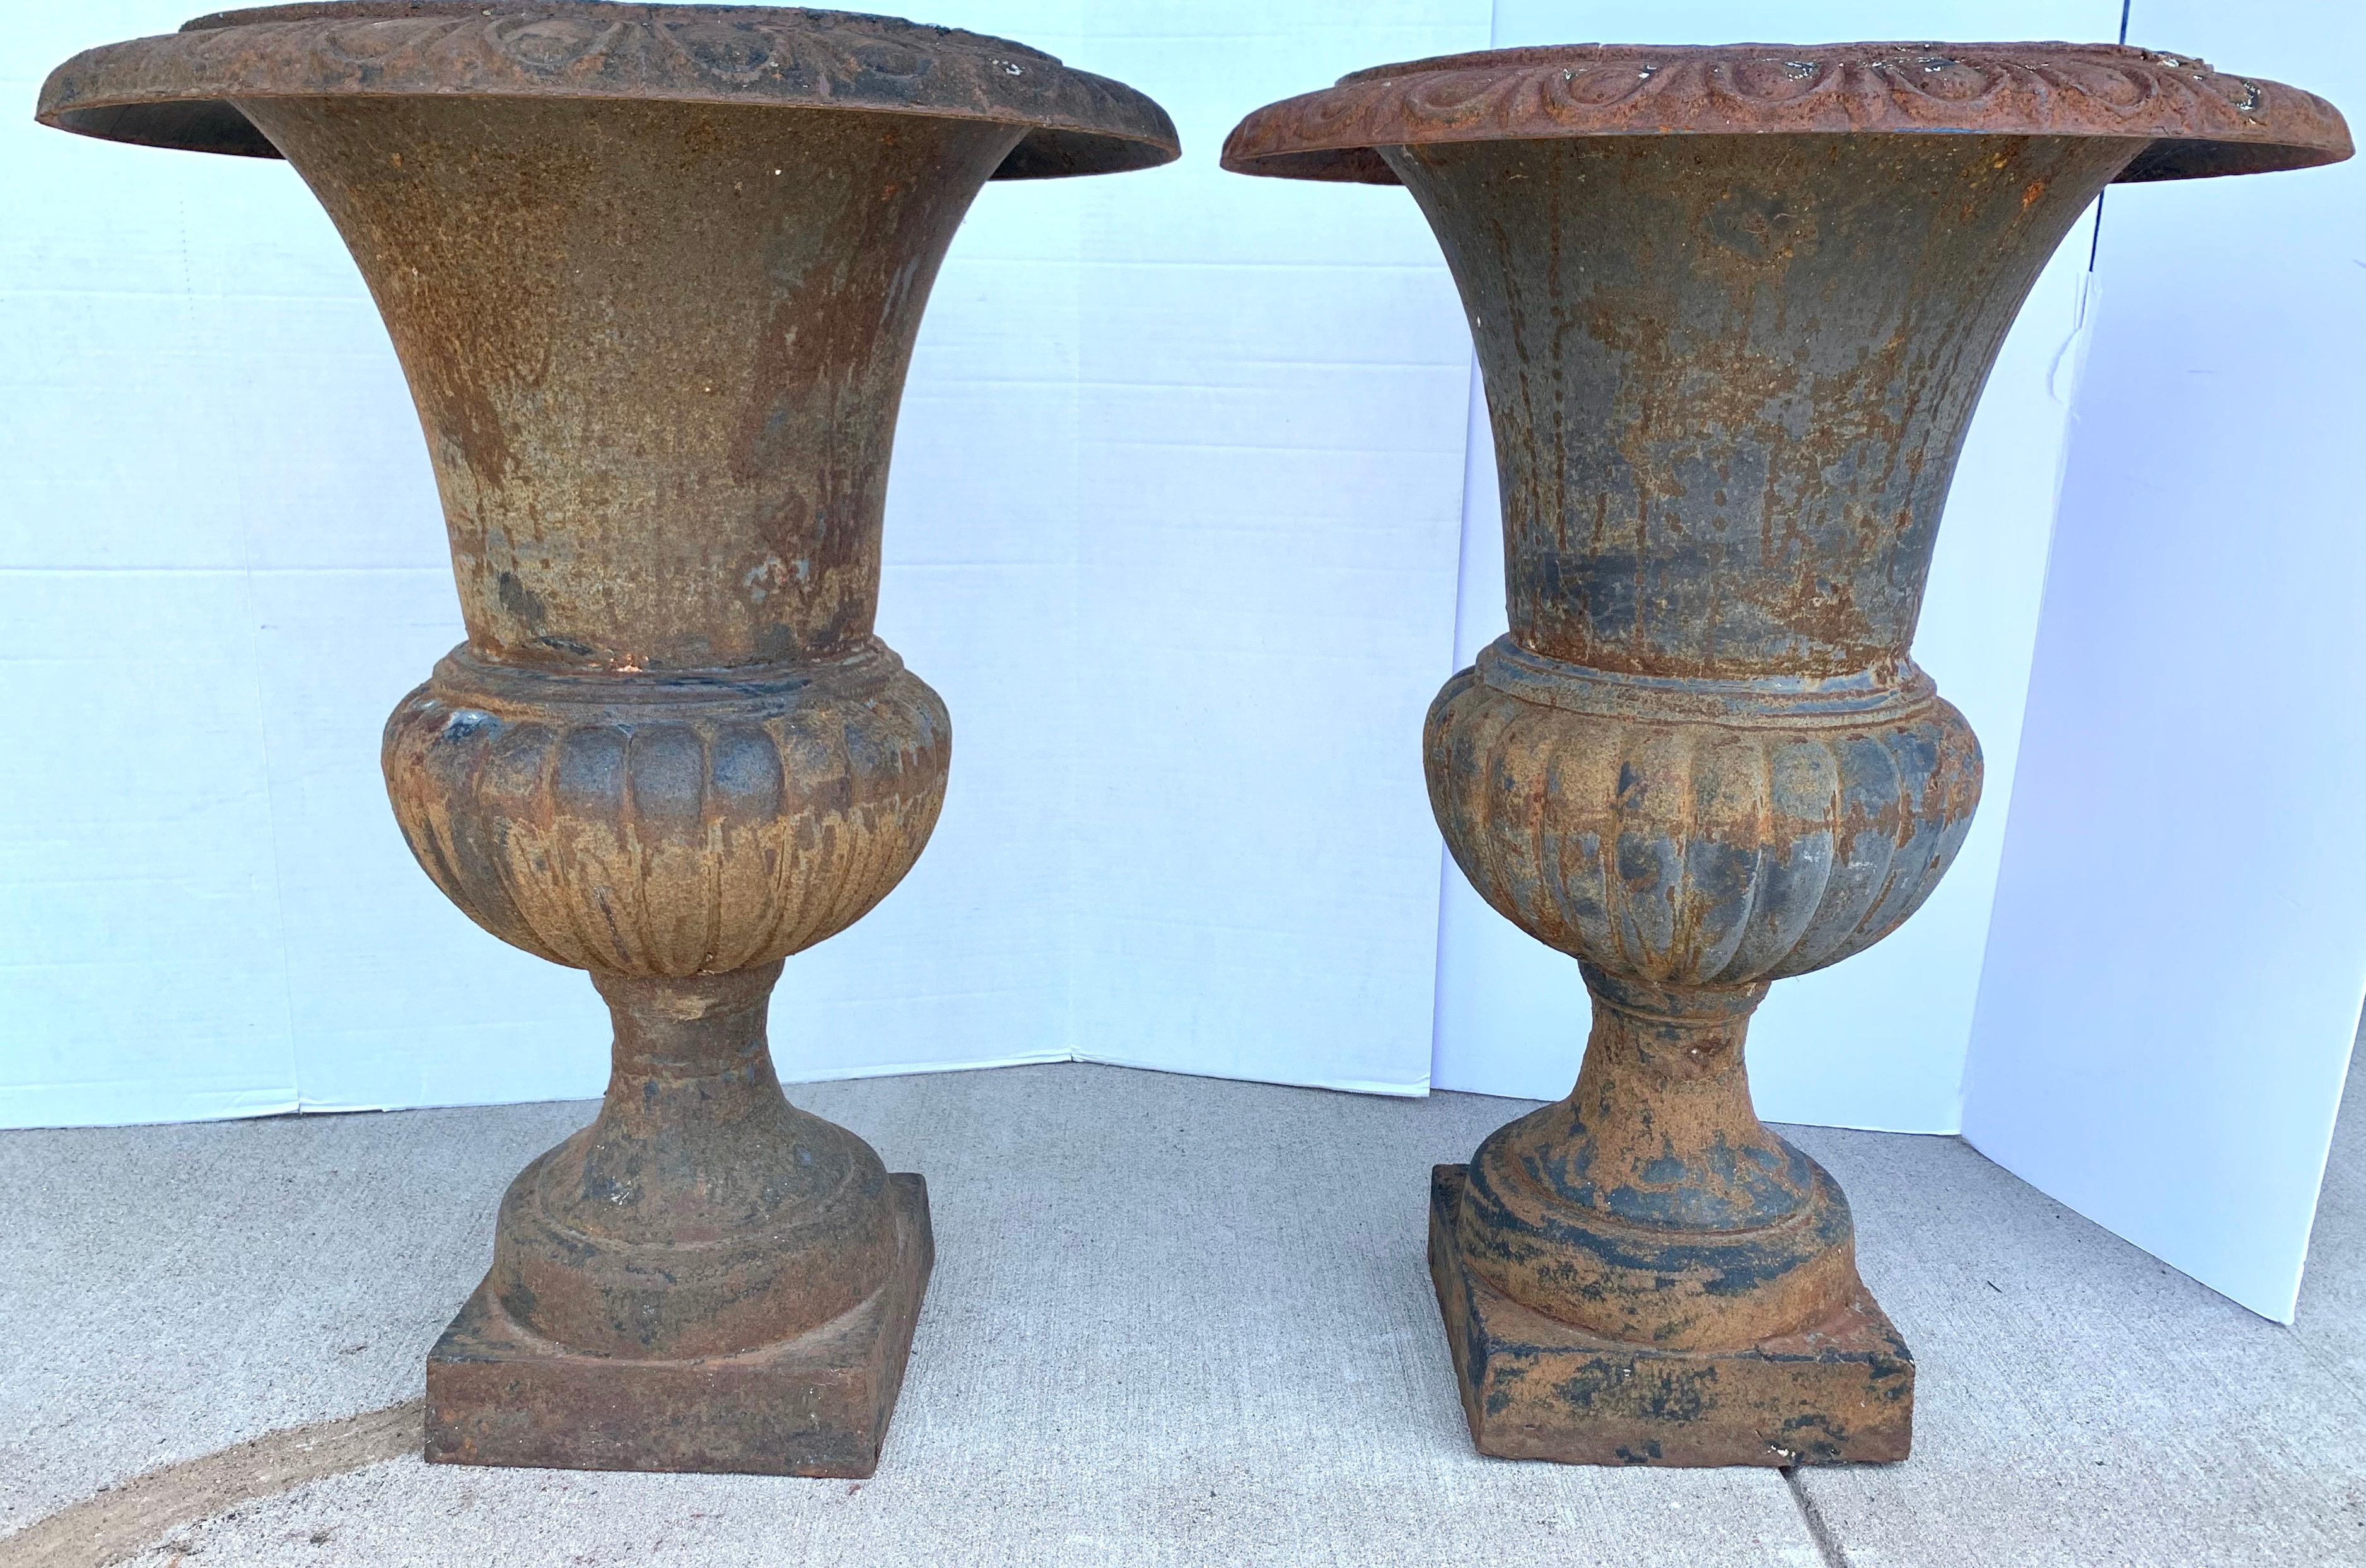 With a gorgeous patina that only comes from a certain age, the late 19th century tall cast irons
urns/planters are sure to make just the right statement at your home. Made in France.